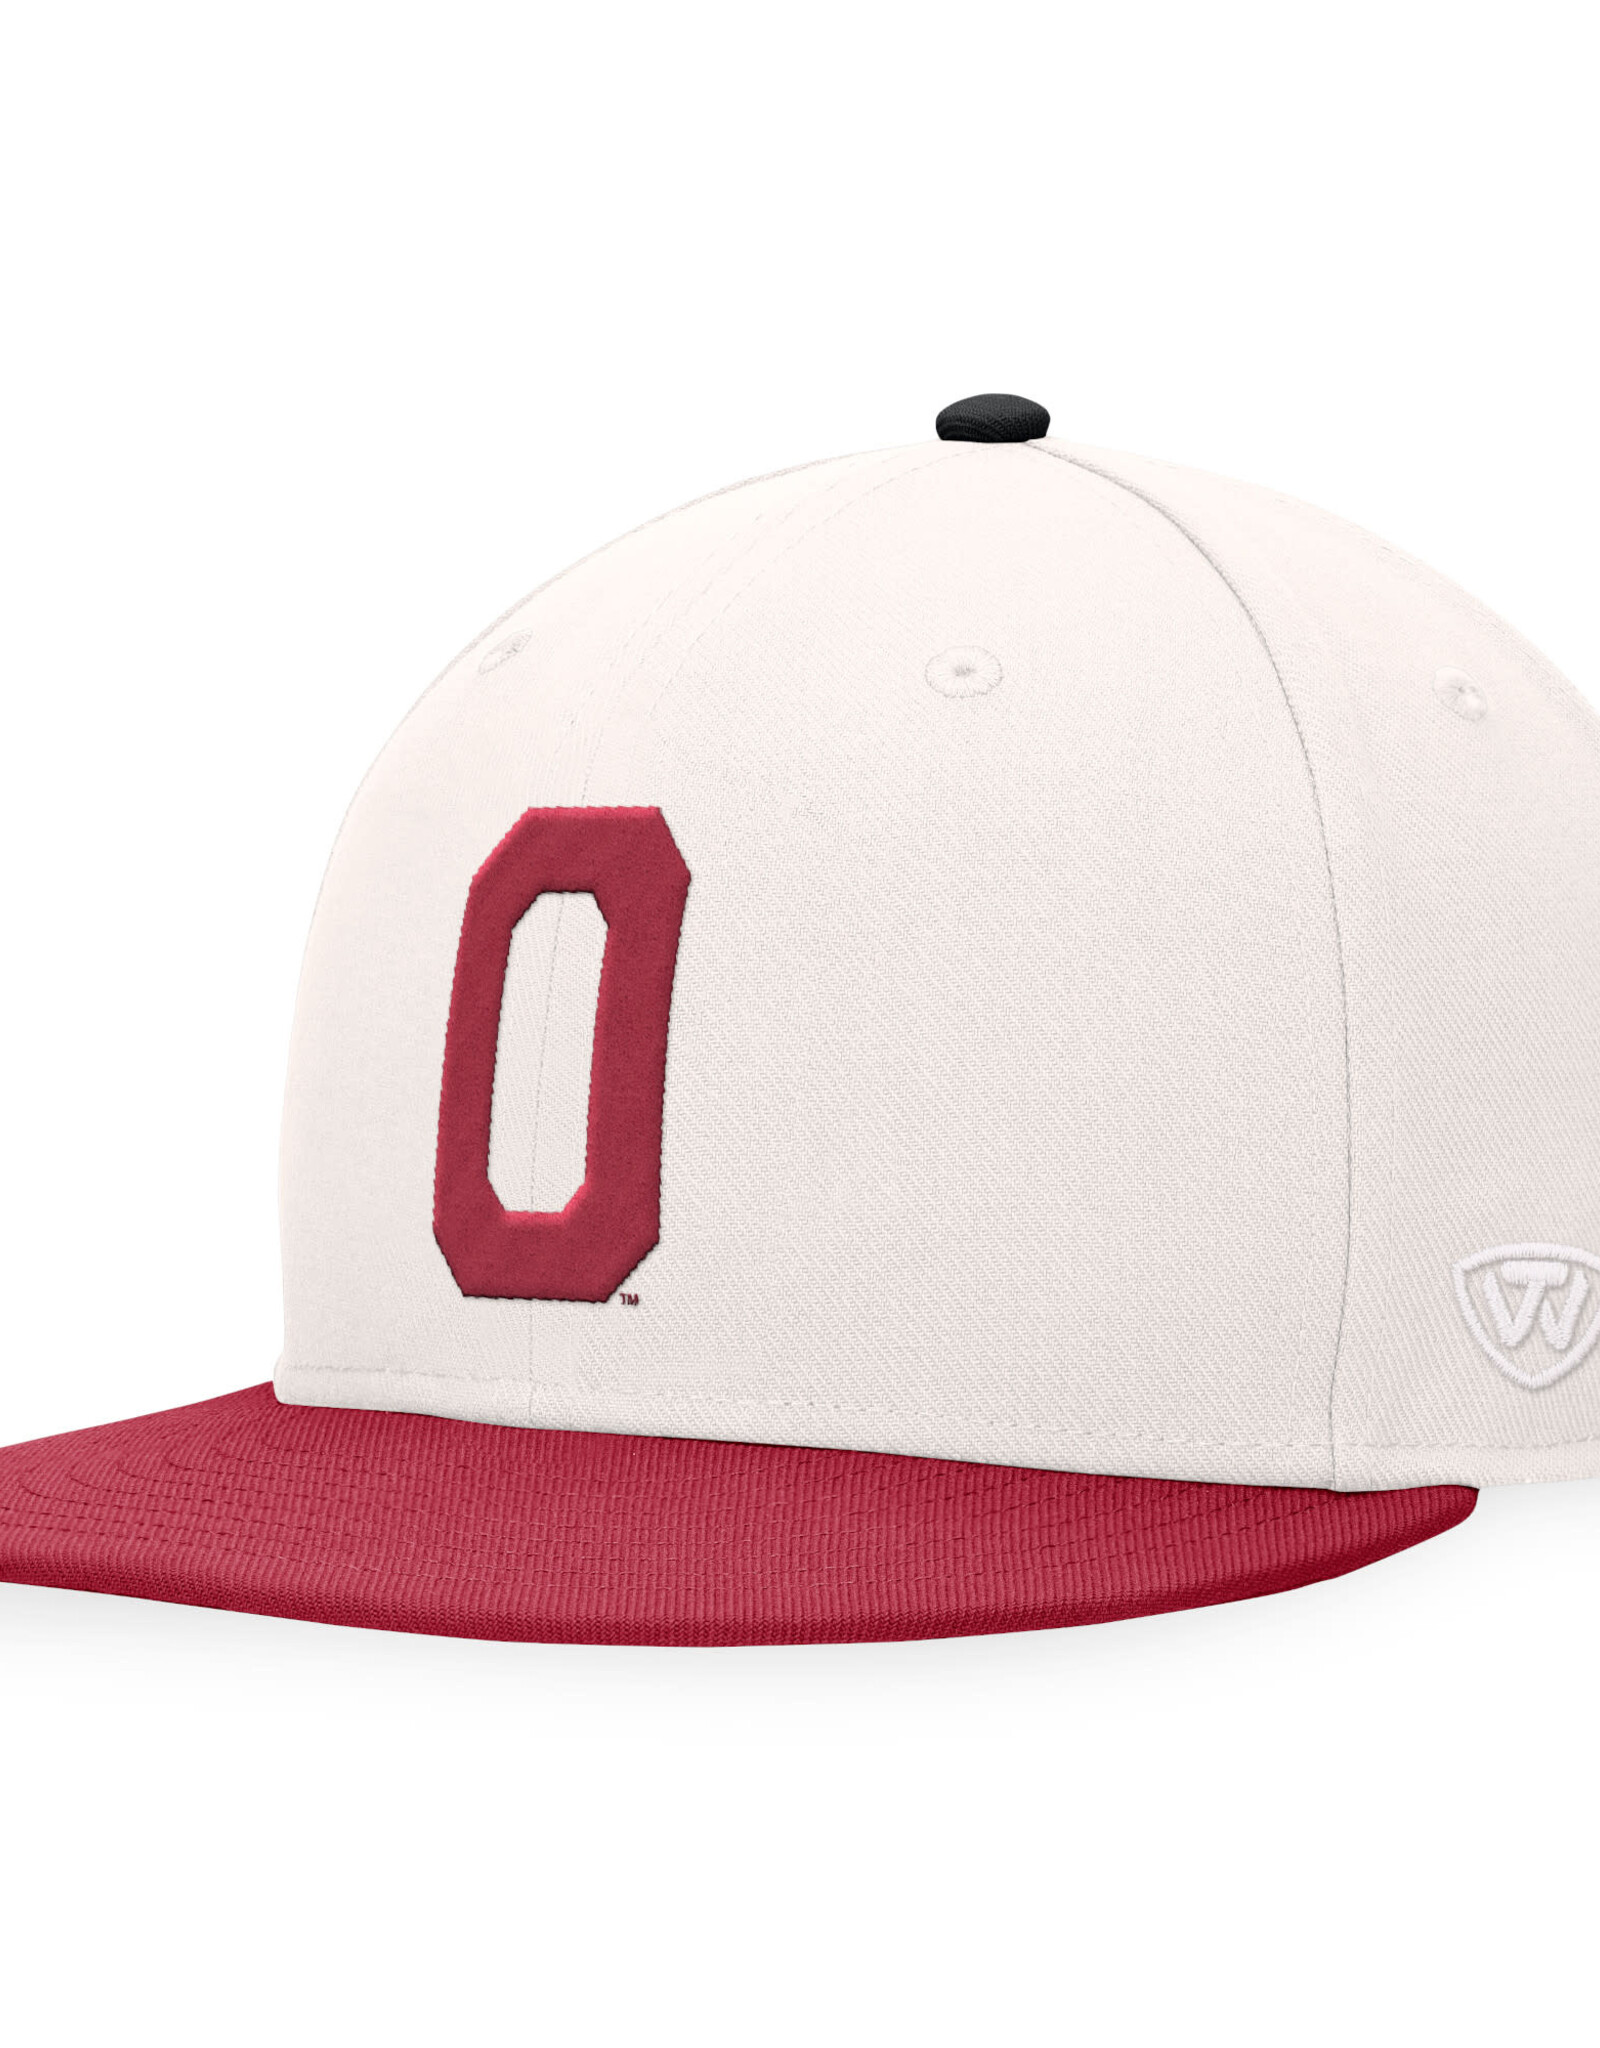 TOW TOW Oklahoma Vintage "O" Fitted Hat